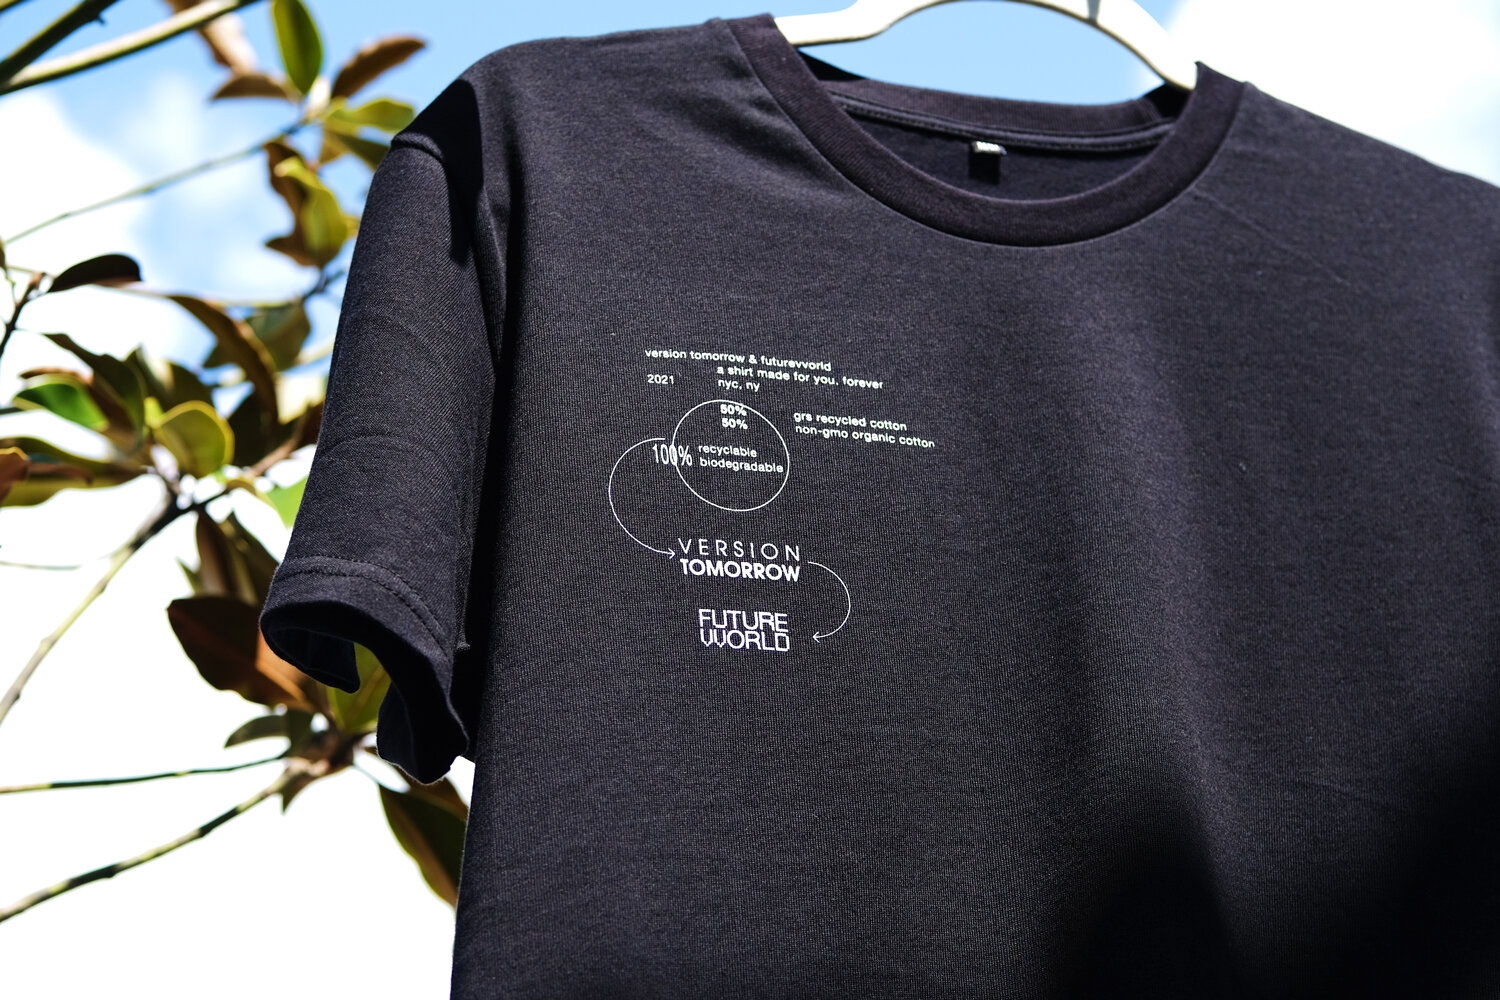 The FUTUREVVORLD x Version Tomorrow Earth Day Tee Challenges Streetwear To Be More Eco-Conscious